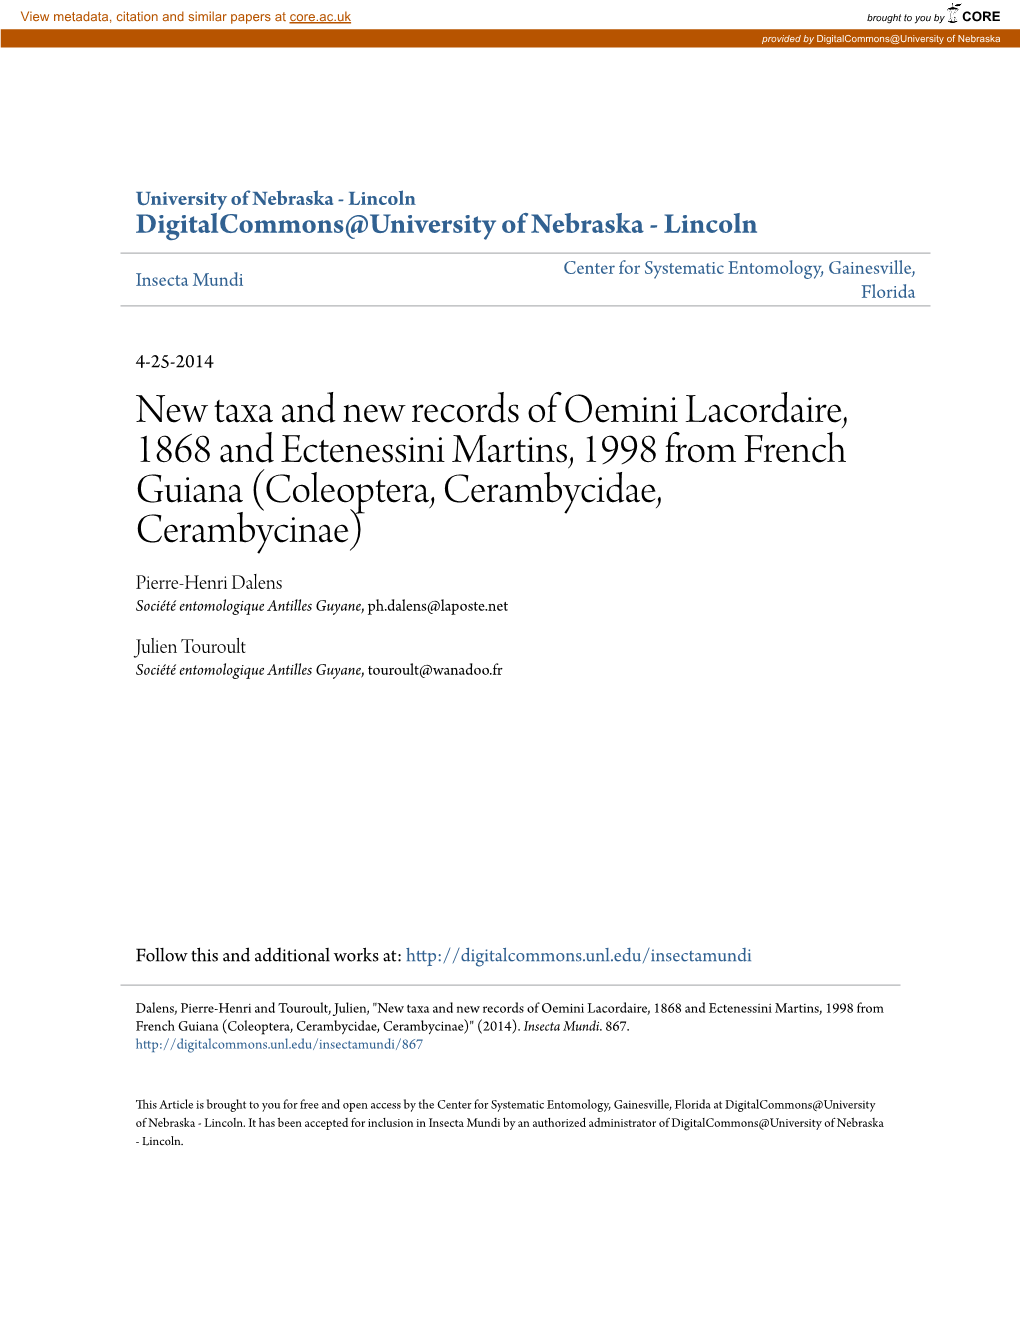 New Taxa and New Records of Oemini Lacordaire, 1868 And